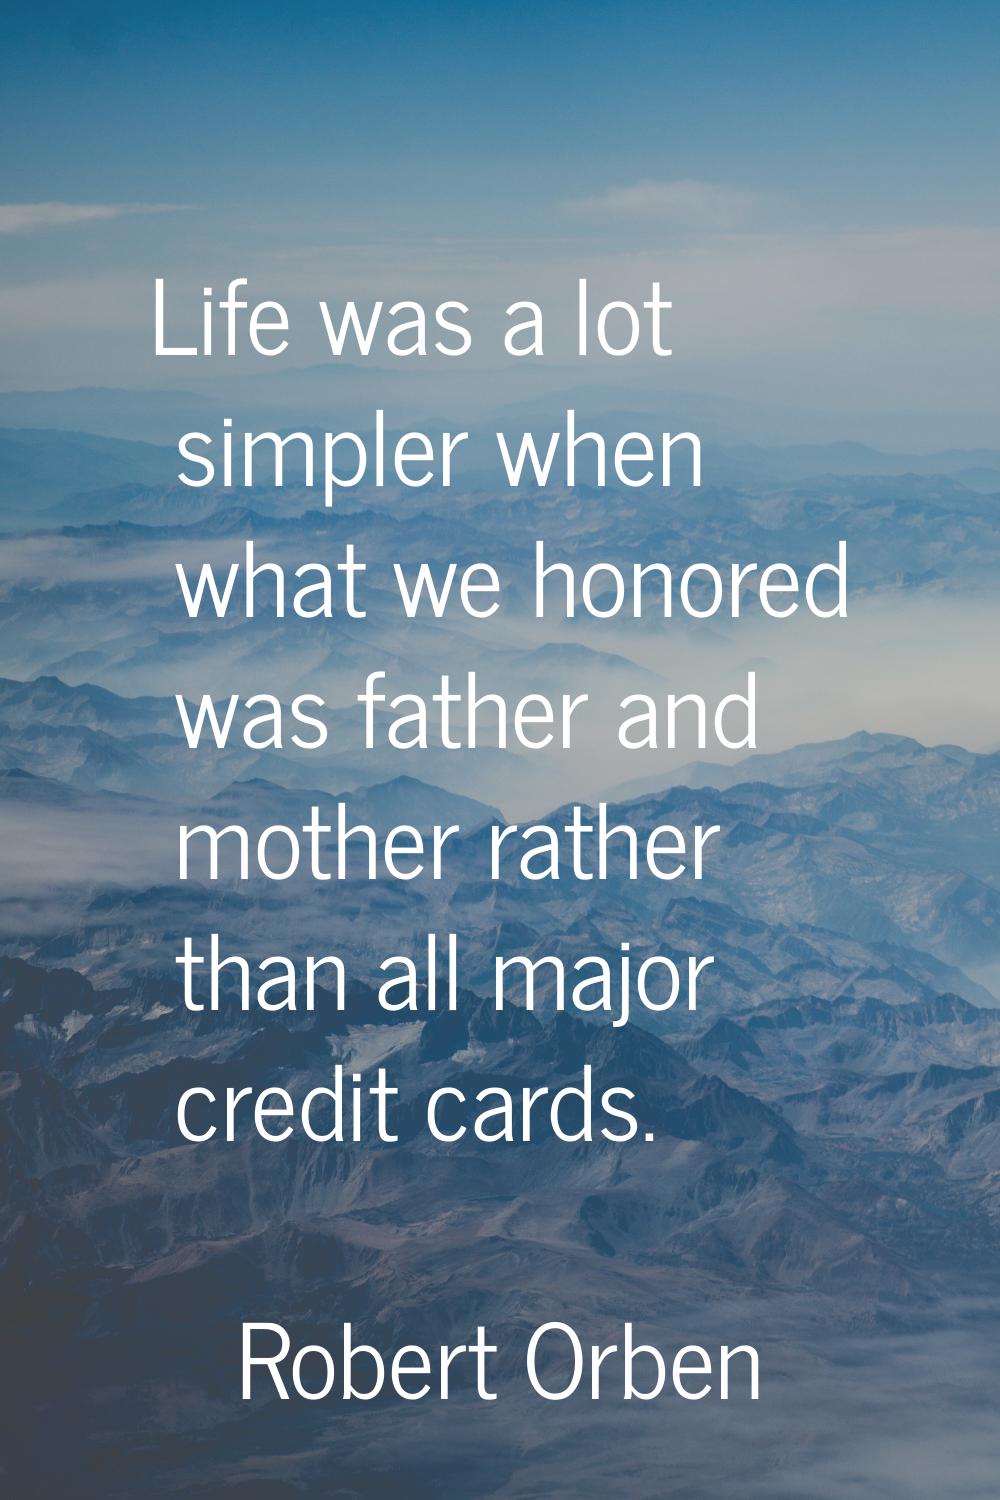 Life was a lot simpler when what we honored was father and mother rather than all major credit card